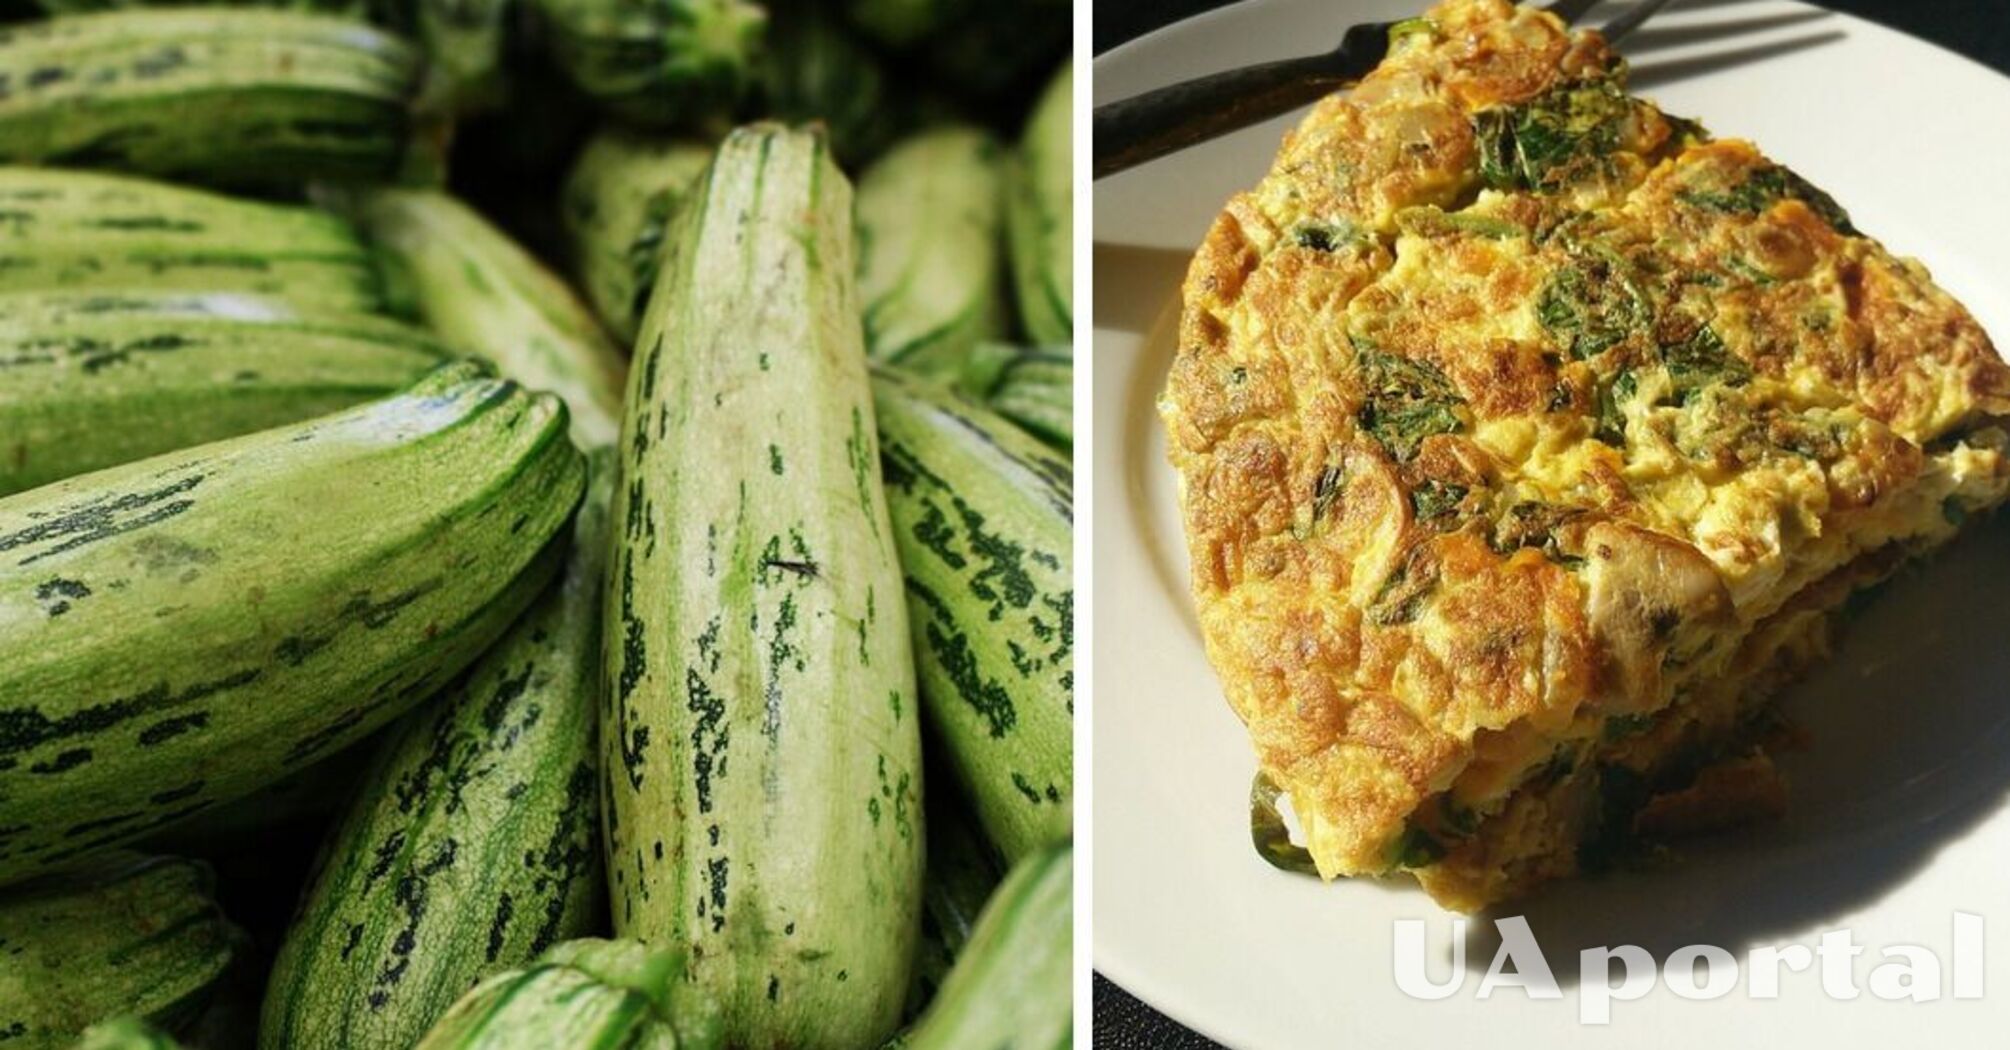 The perfect summer breakfast: housewives share a recipe for an omelet with zucchini